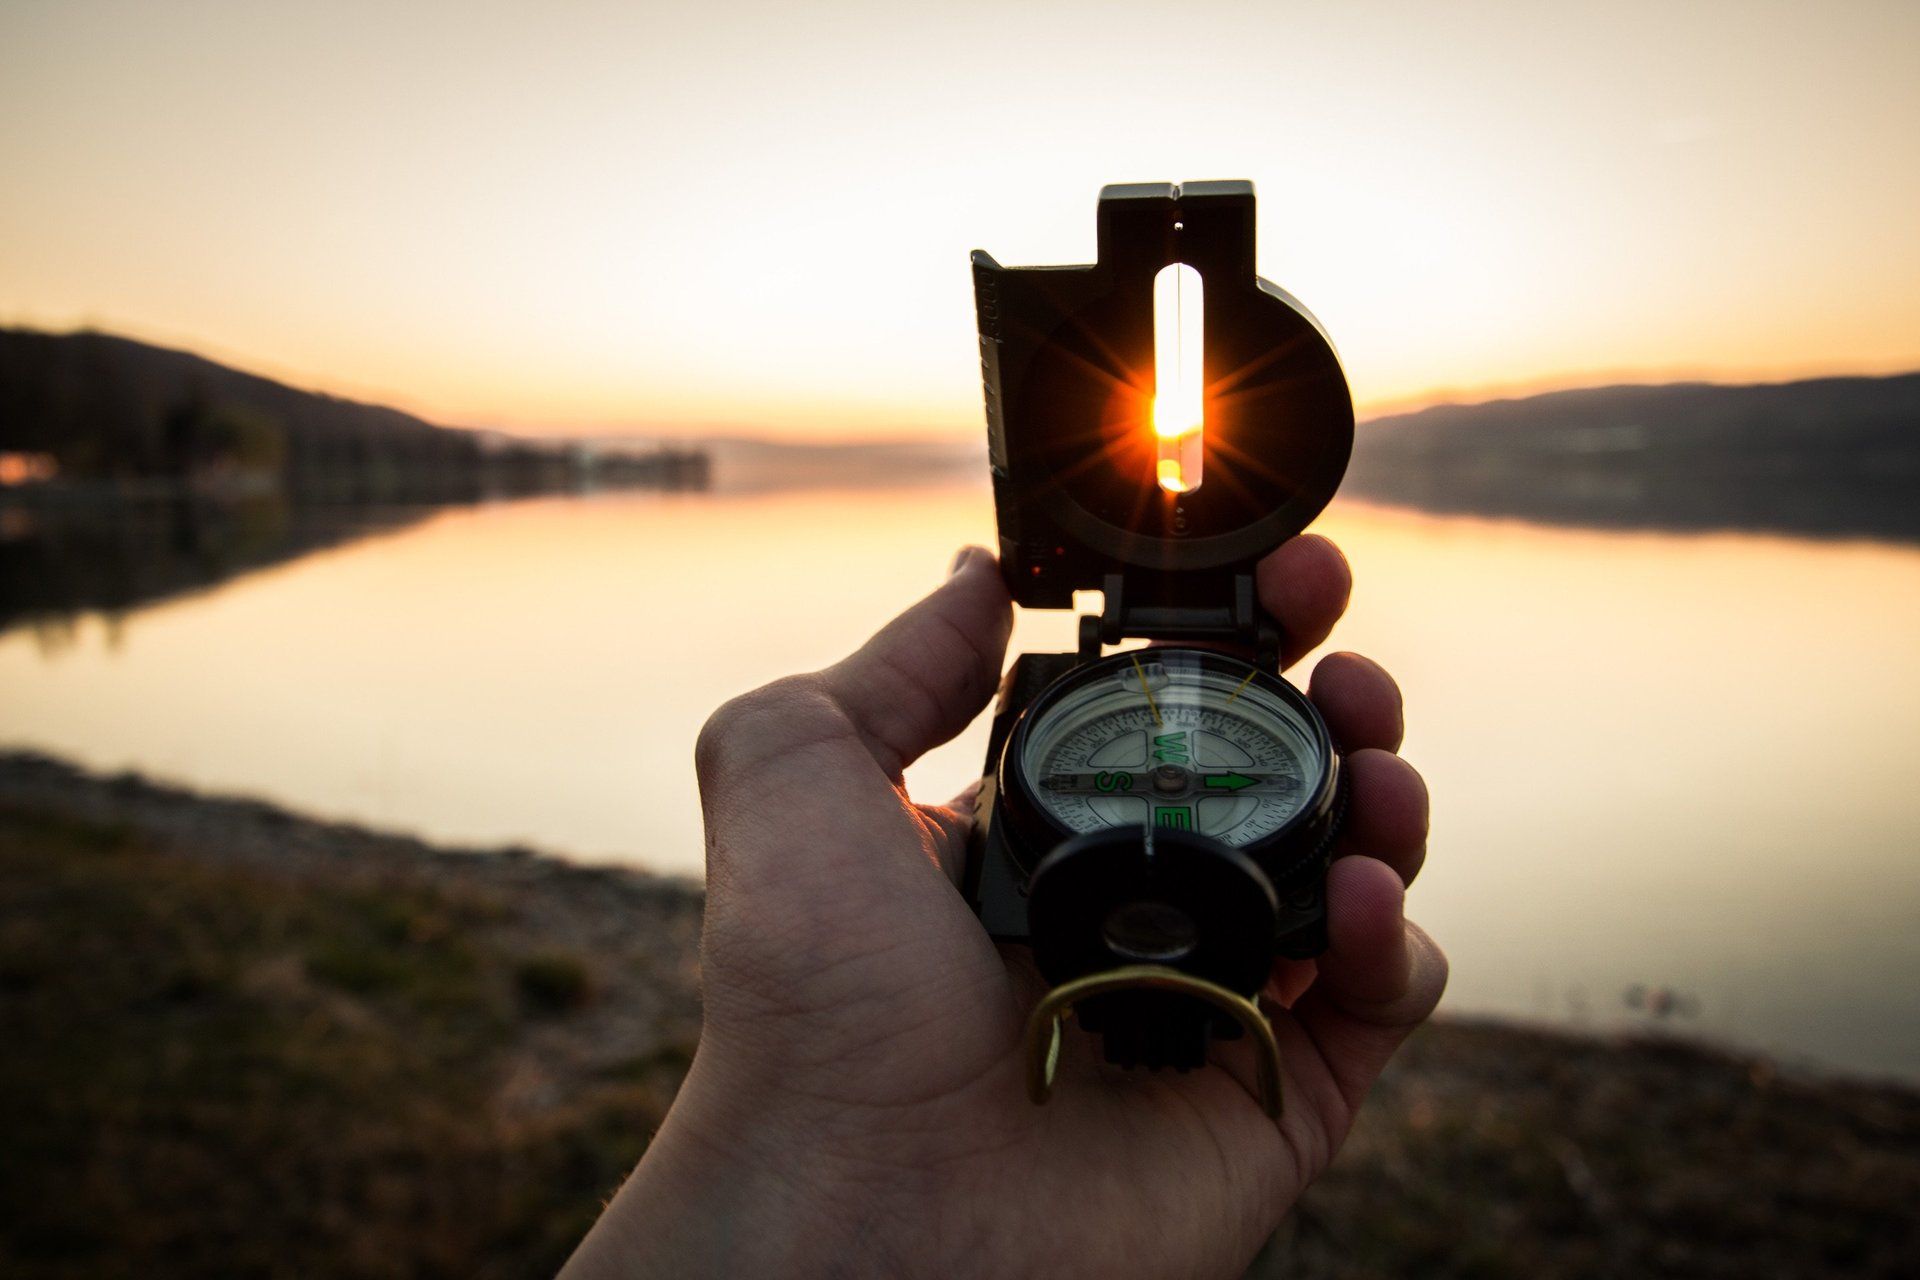 A person is holding a compass in front of a lake at sunset.